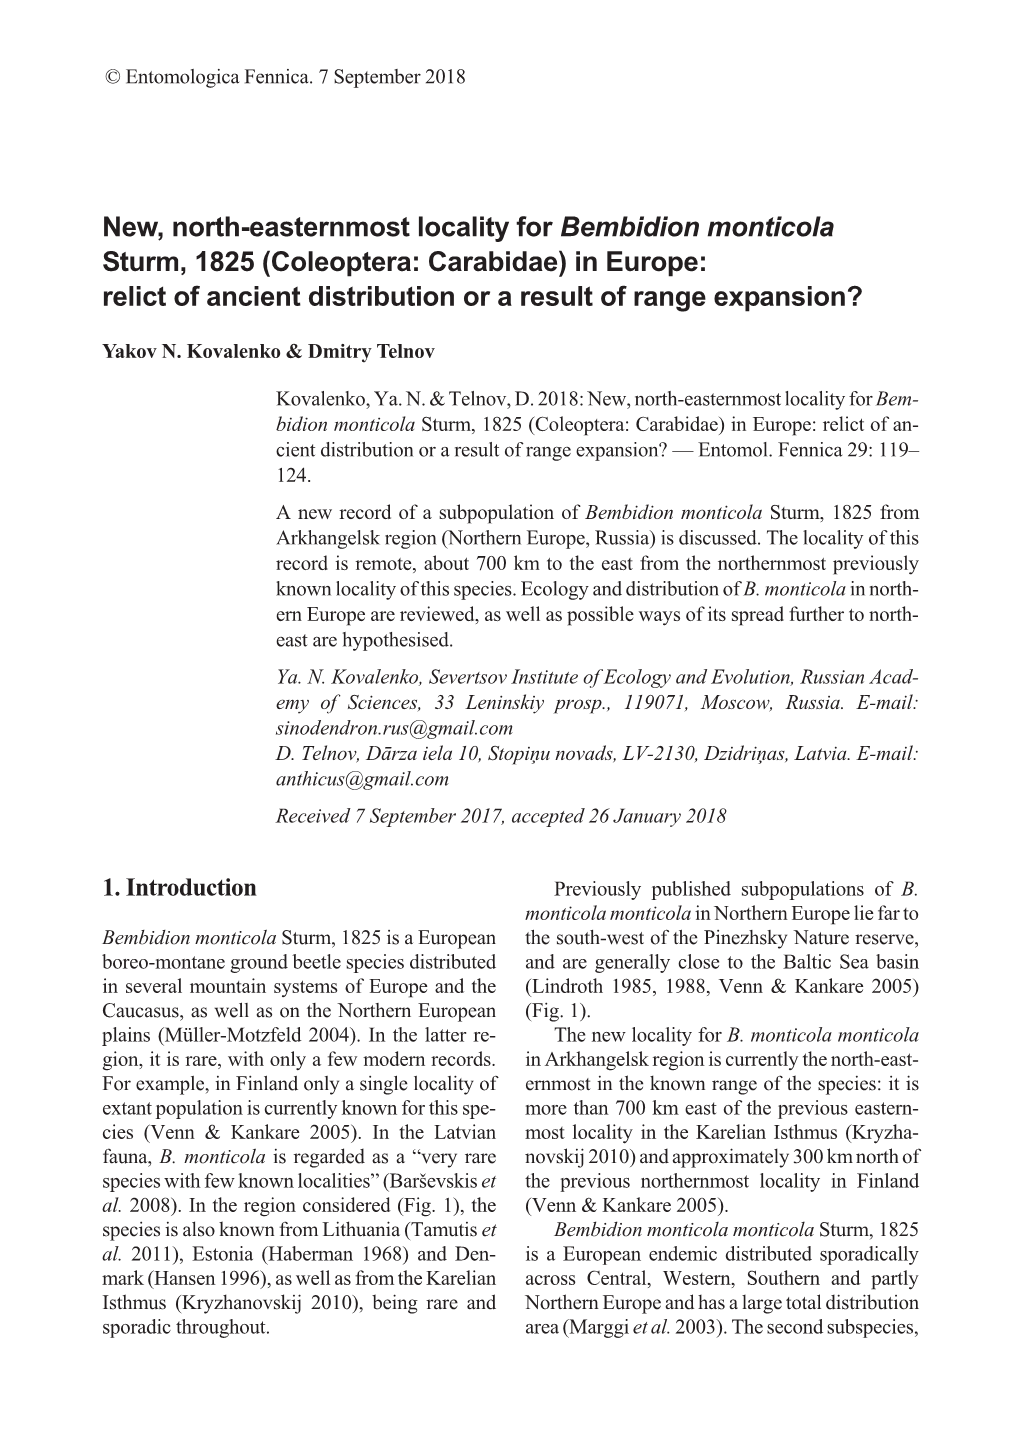 Coleoptera: Carabidae) in Europe: Relict of Ancient Distribution Or a Result of Range Expansion?